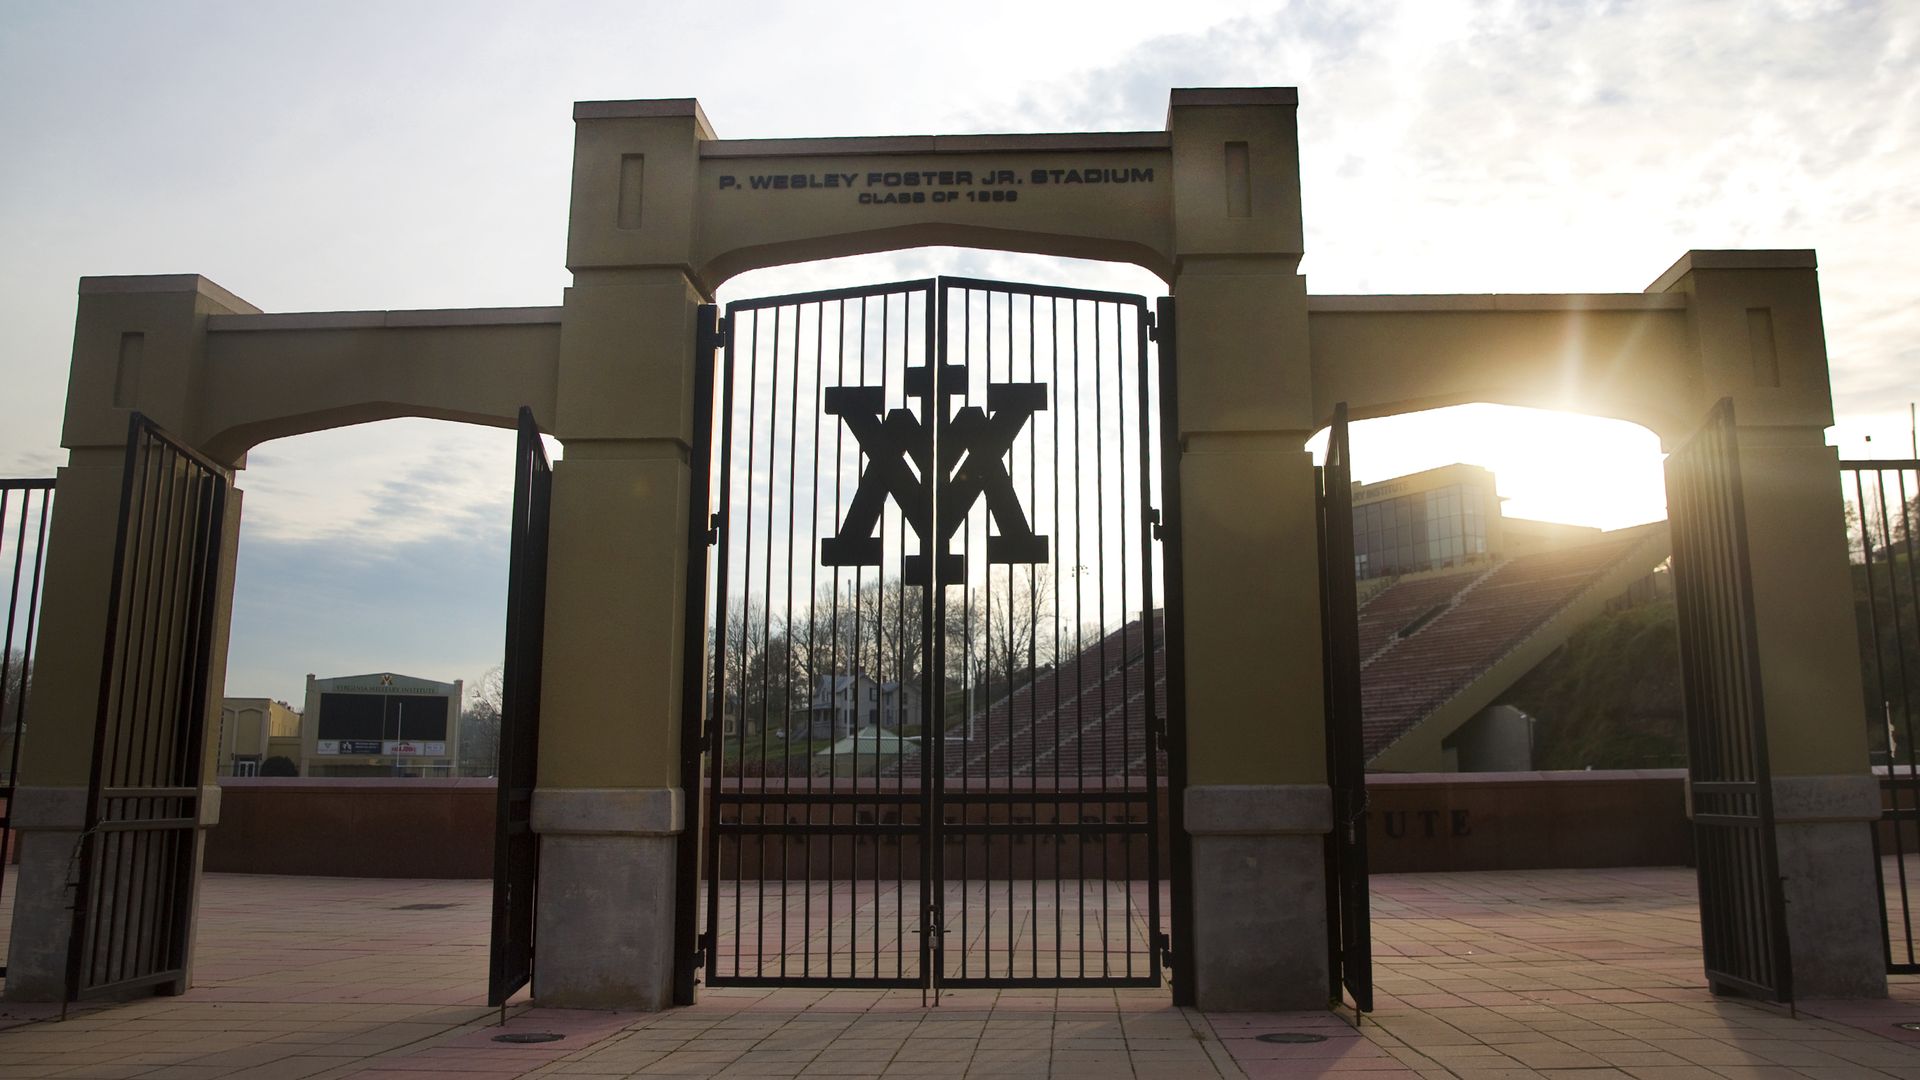 The entrance to Virginia Military Institute's P. Wesley Foster, Jr. Stadium.